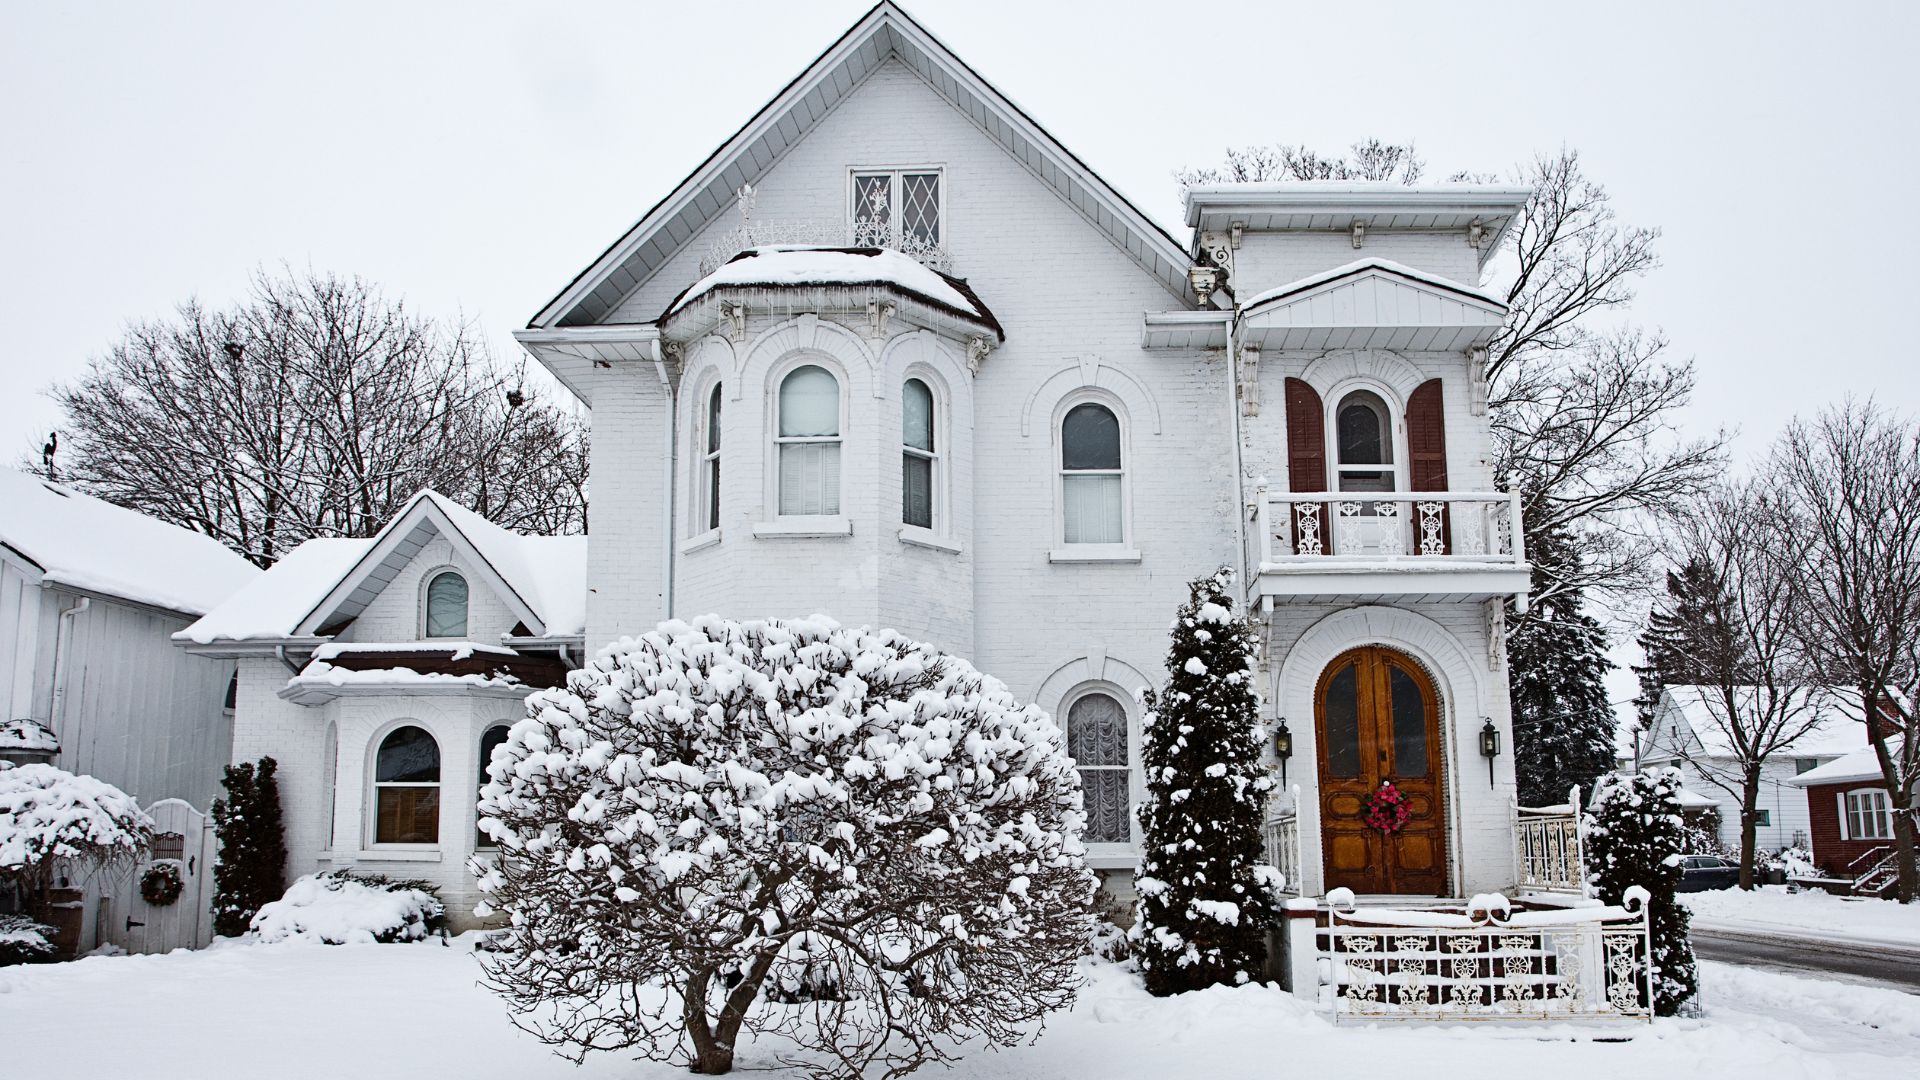 How to Prepare Your Home for Winter